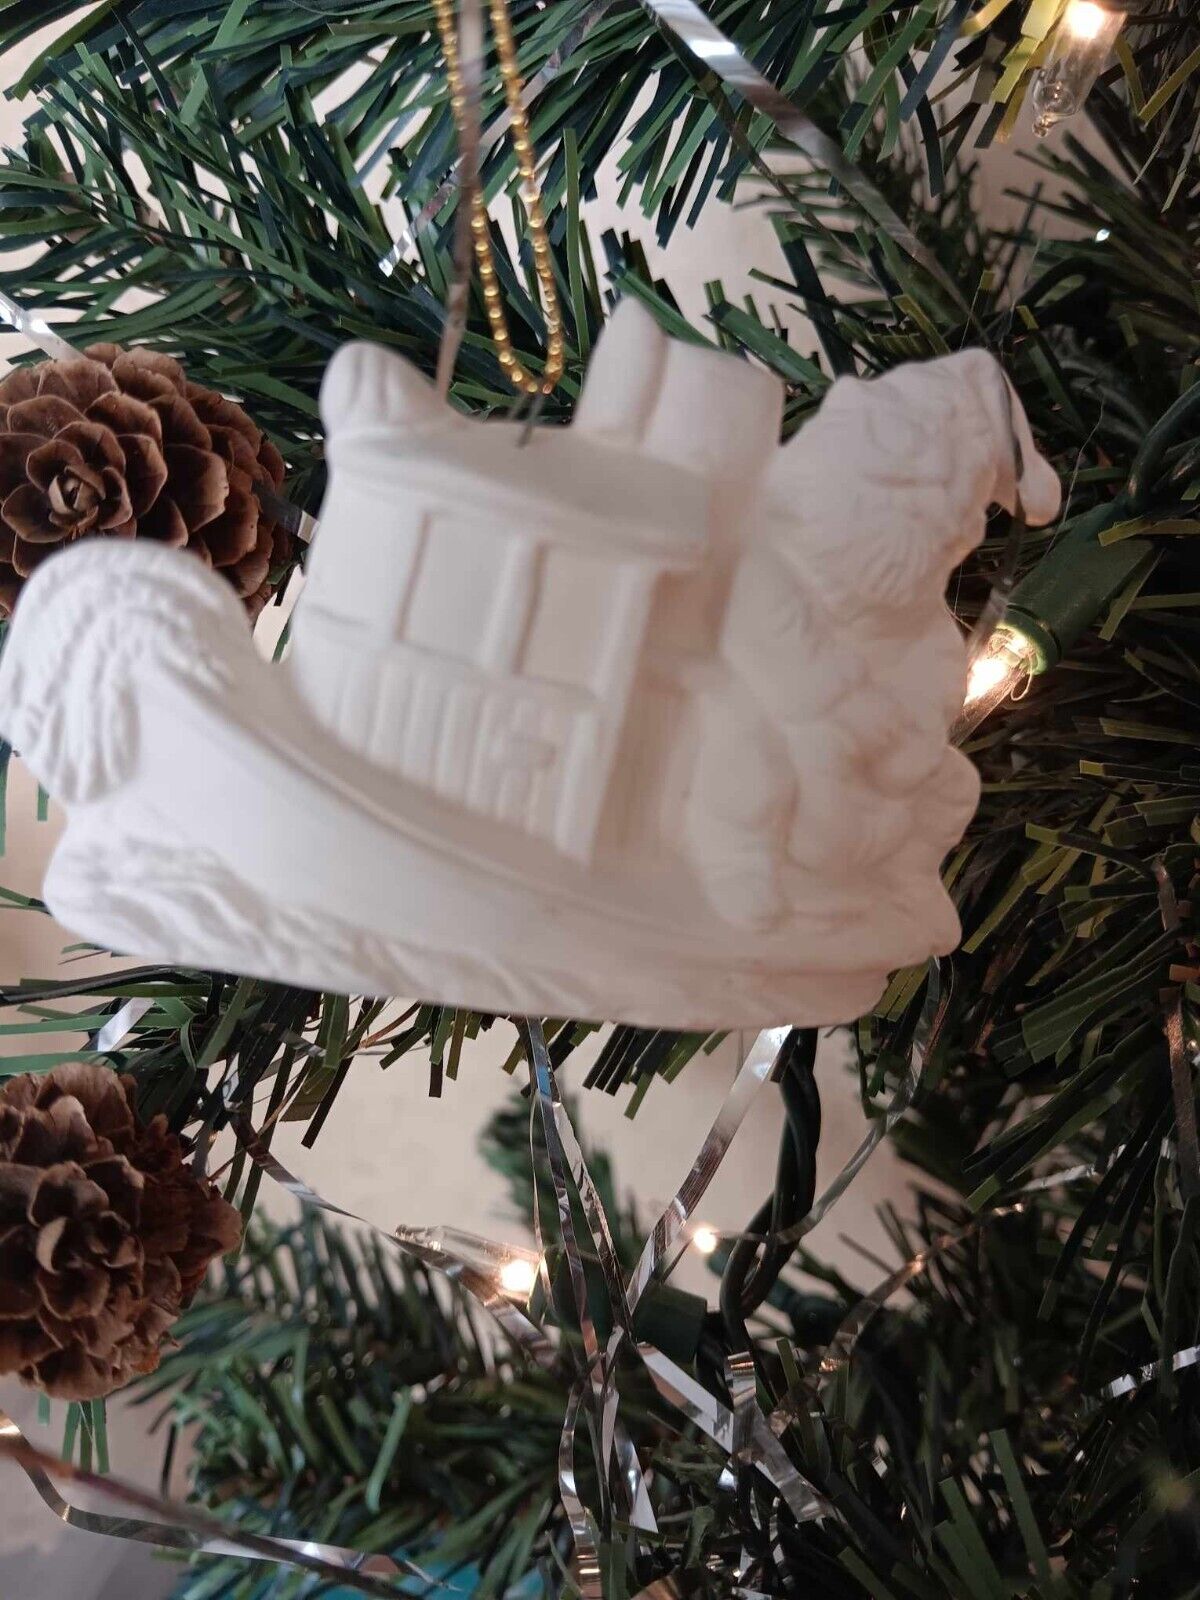 Santa on boat ceramic bisque-ready to paint- Christmas ornament S 362